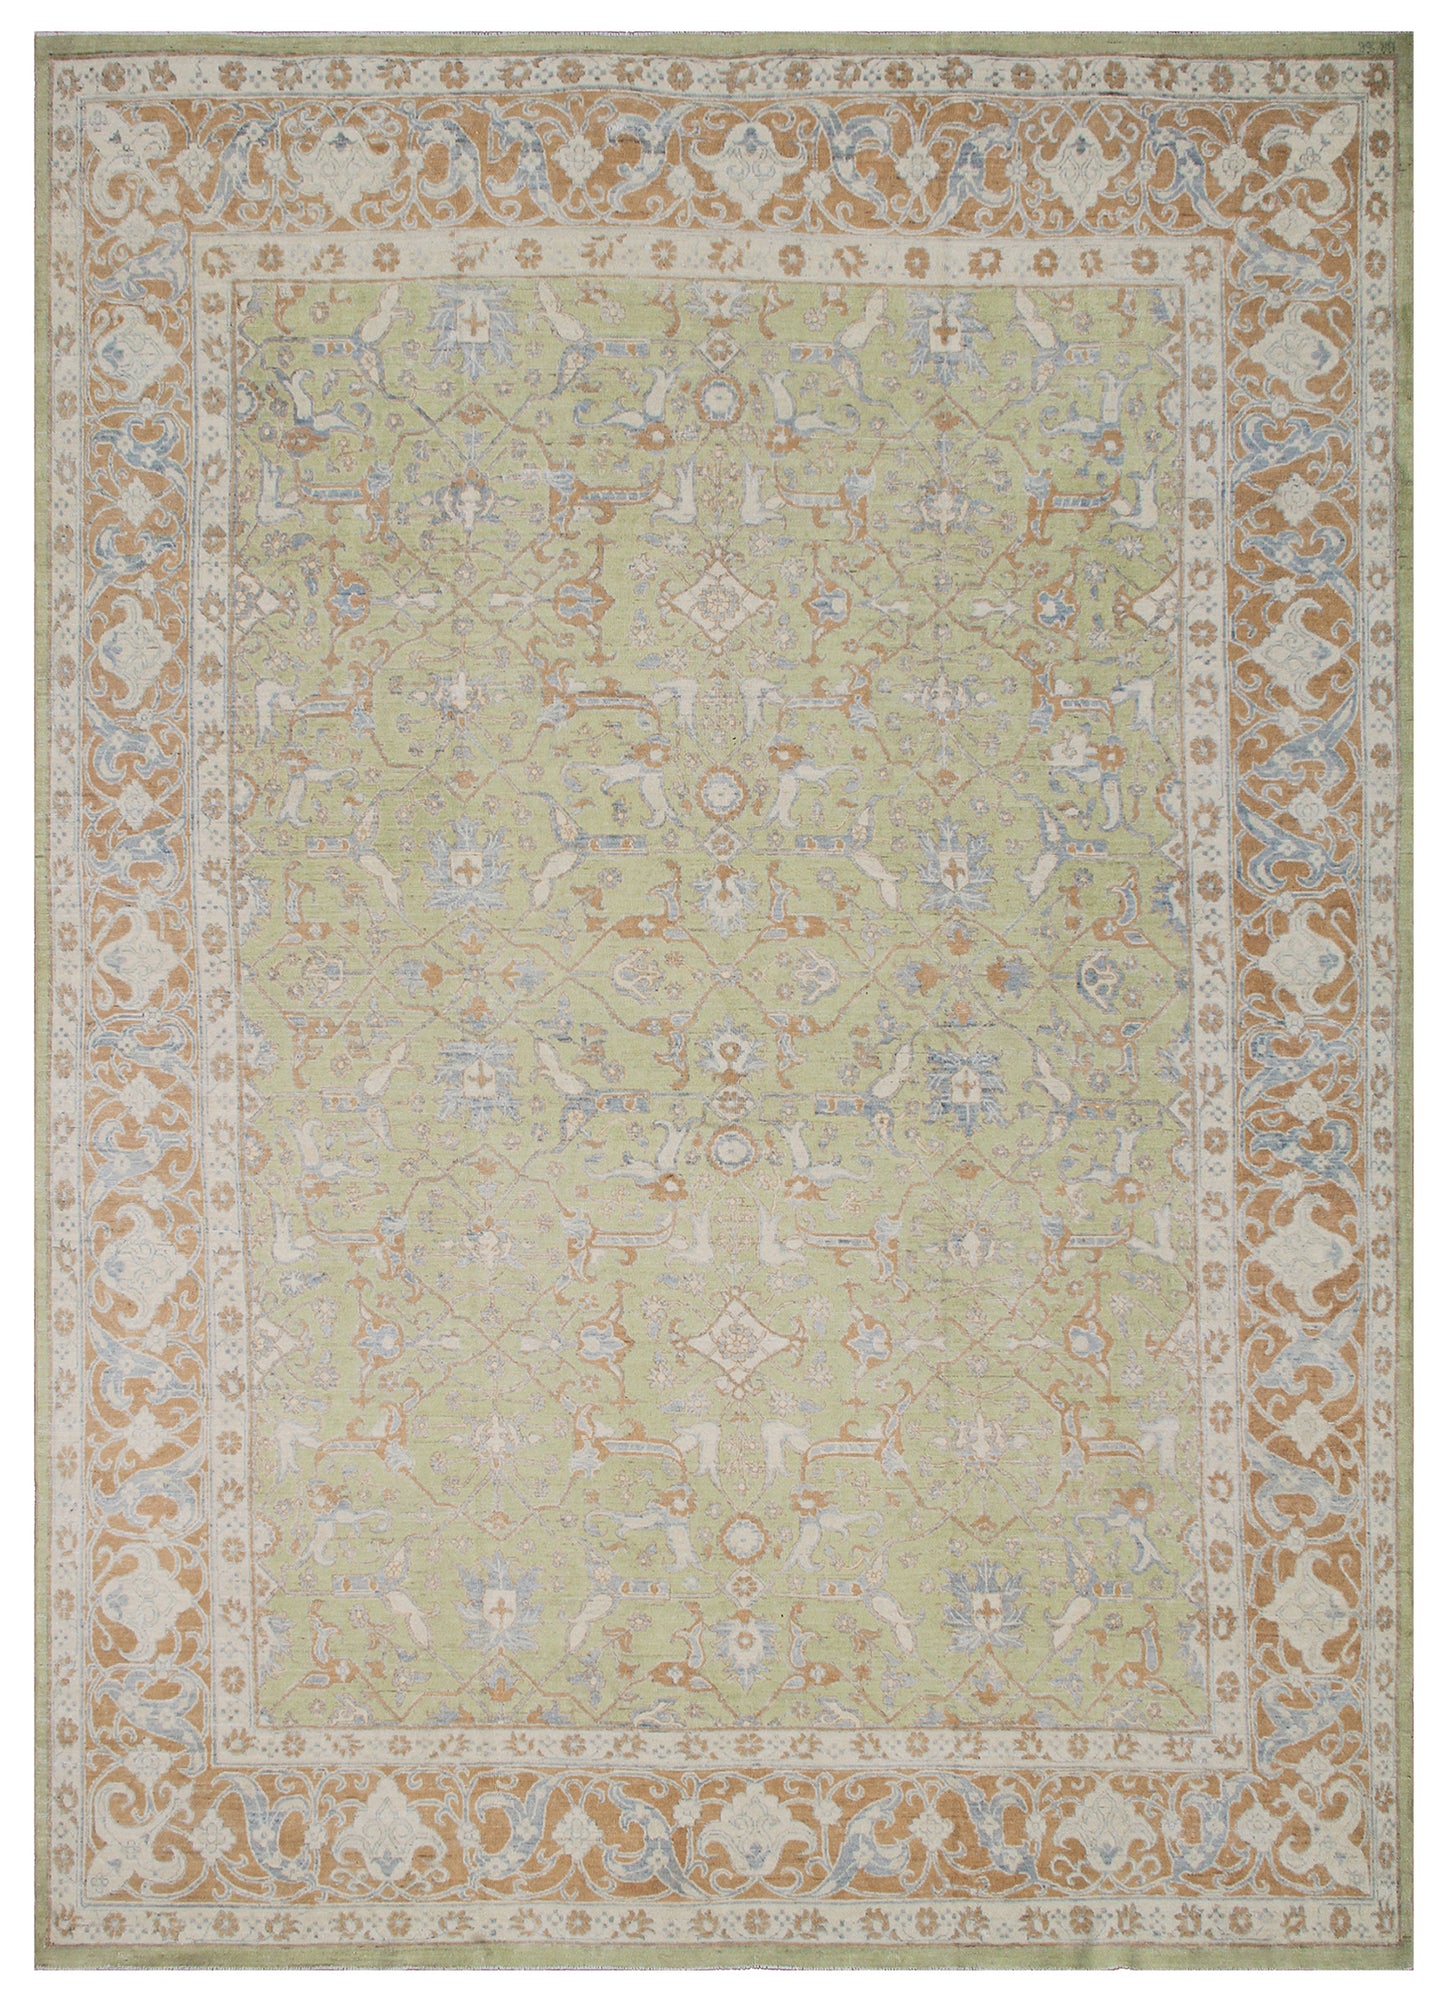 10'x14 Ariana Traditional Green Blue Ivory Rug